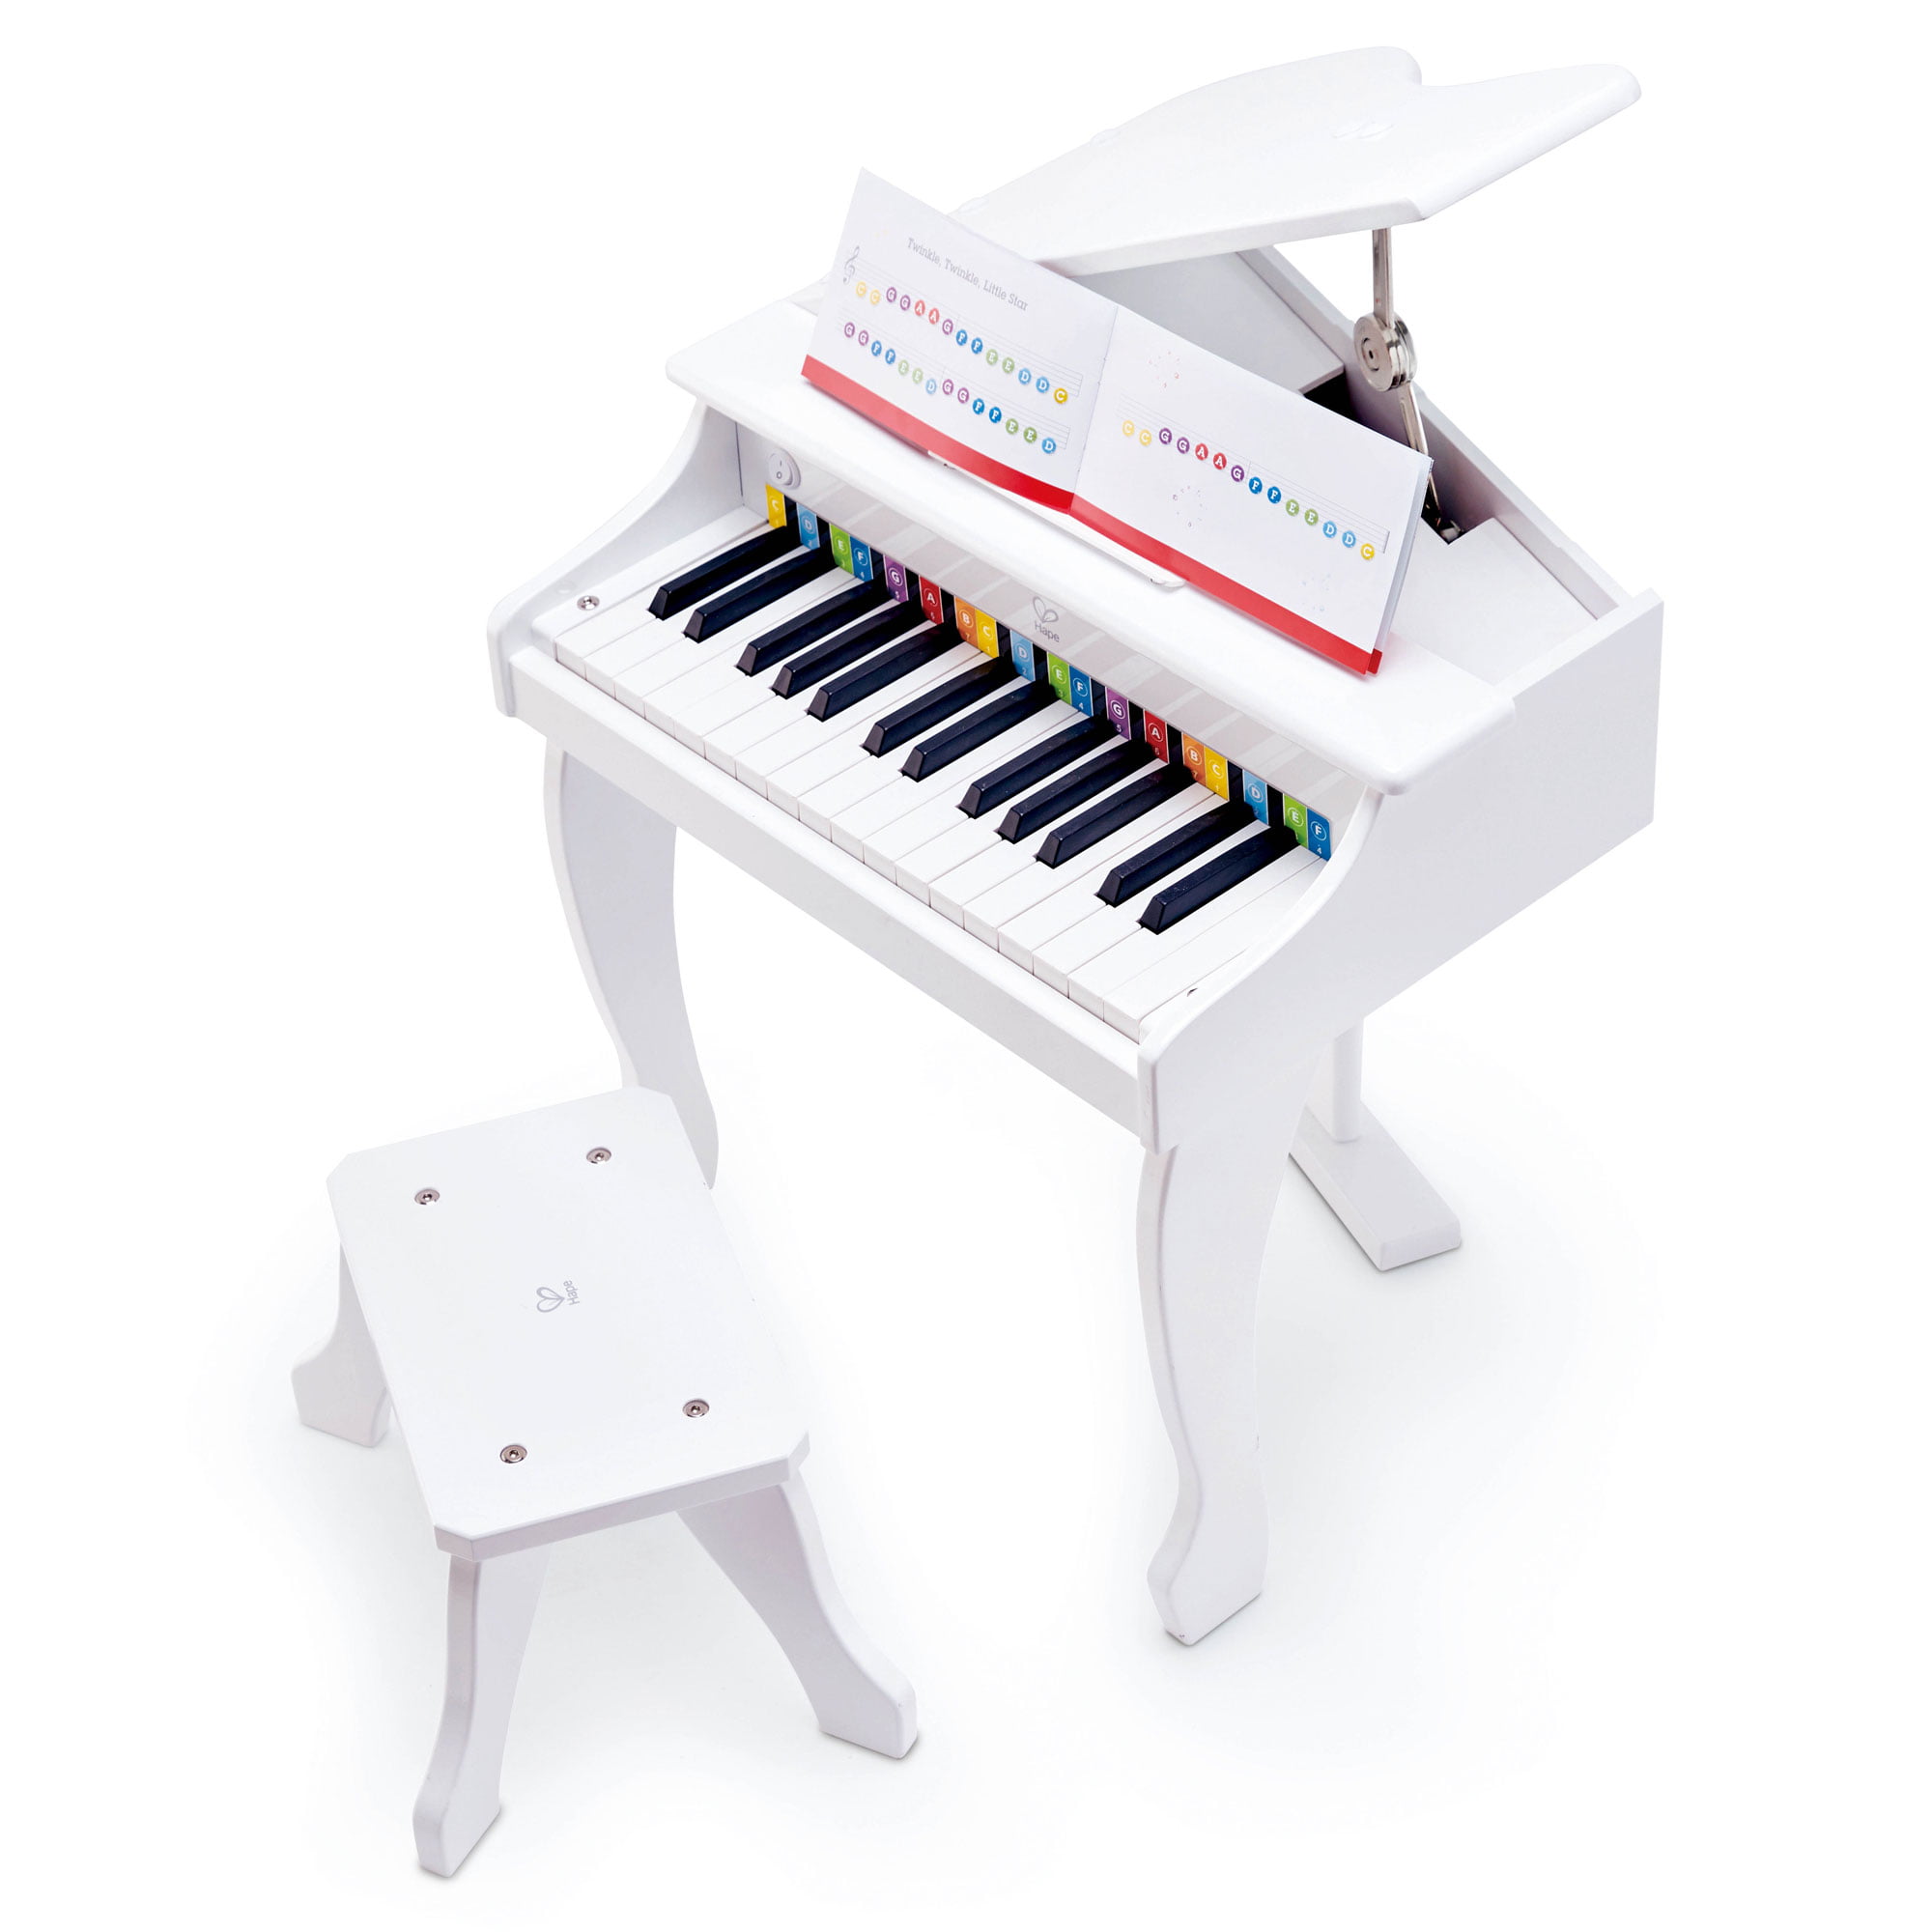 Details about   Toys Present 30-key Children's Wooden Piano Four Feet With Music Stand US NEW 